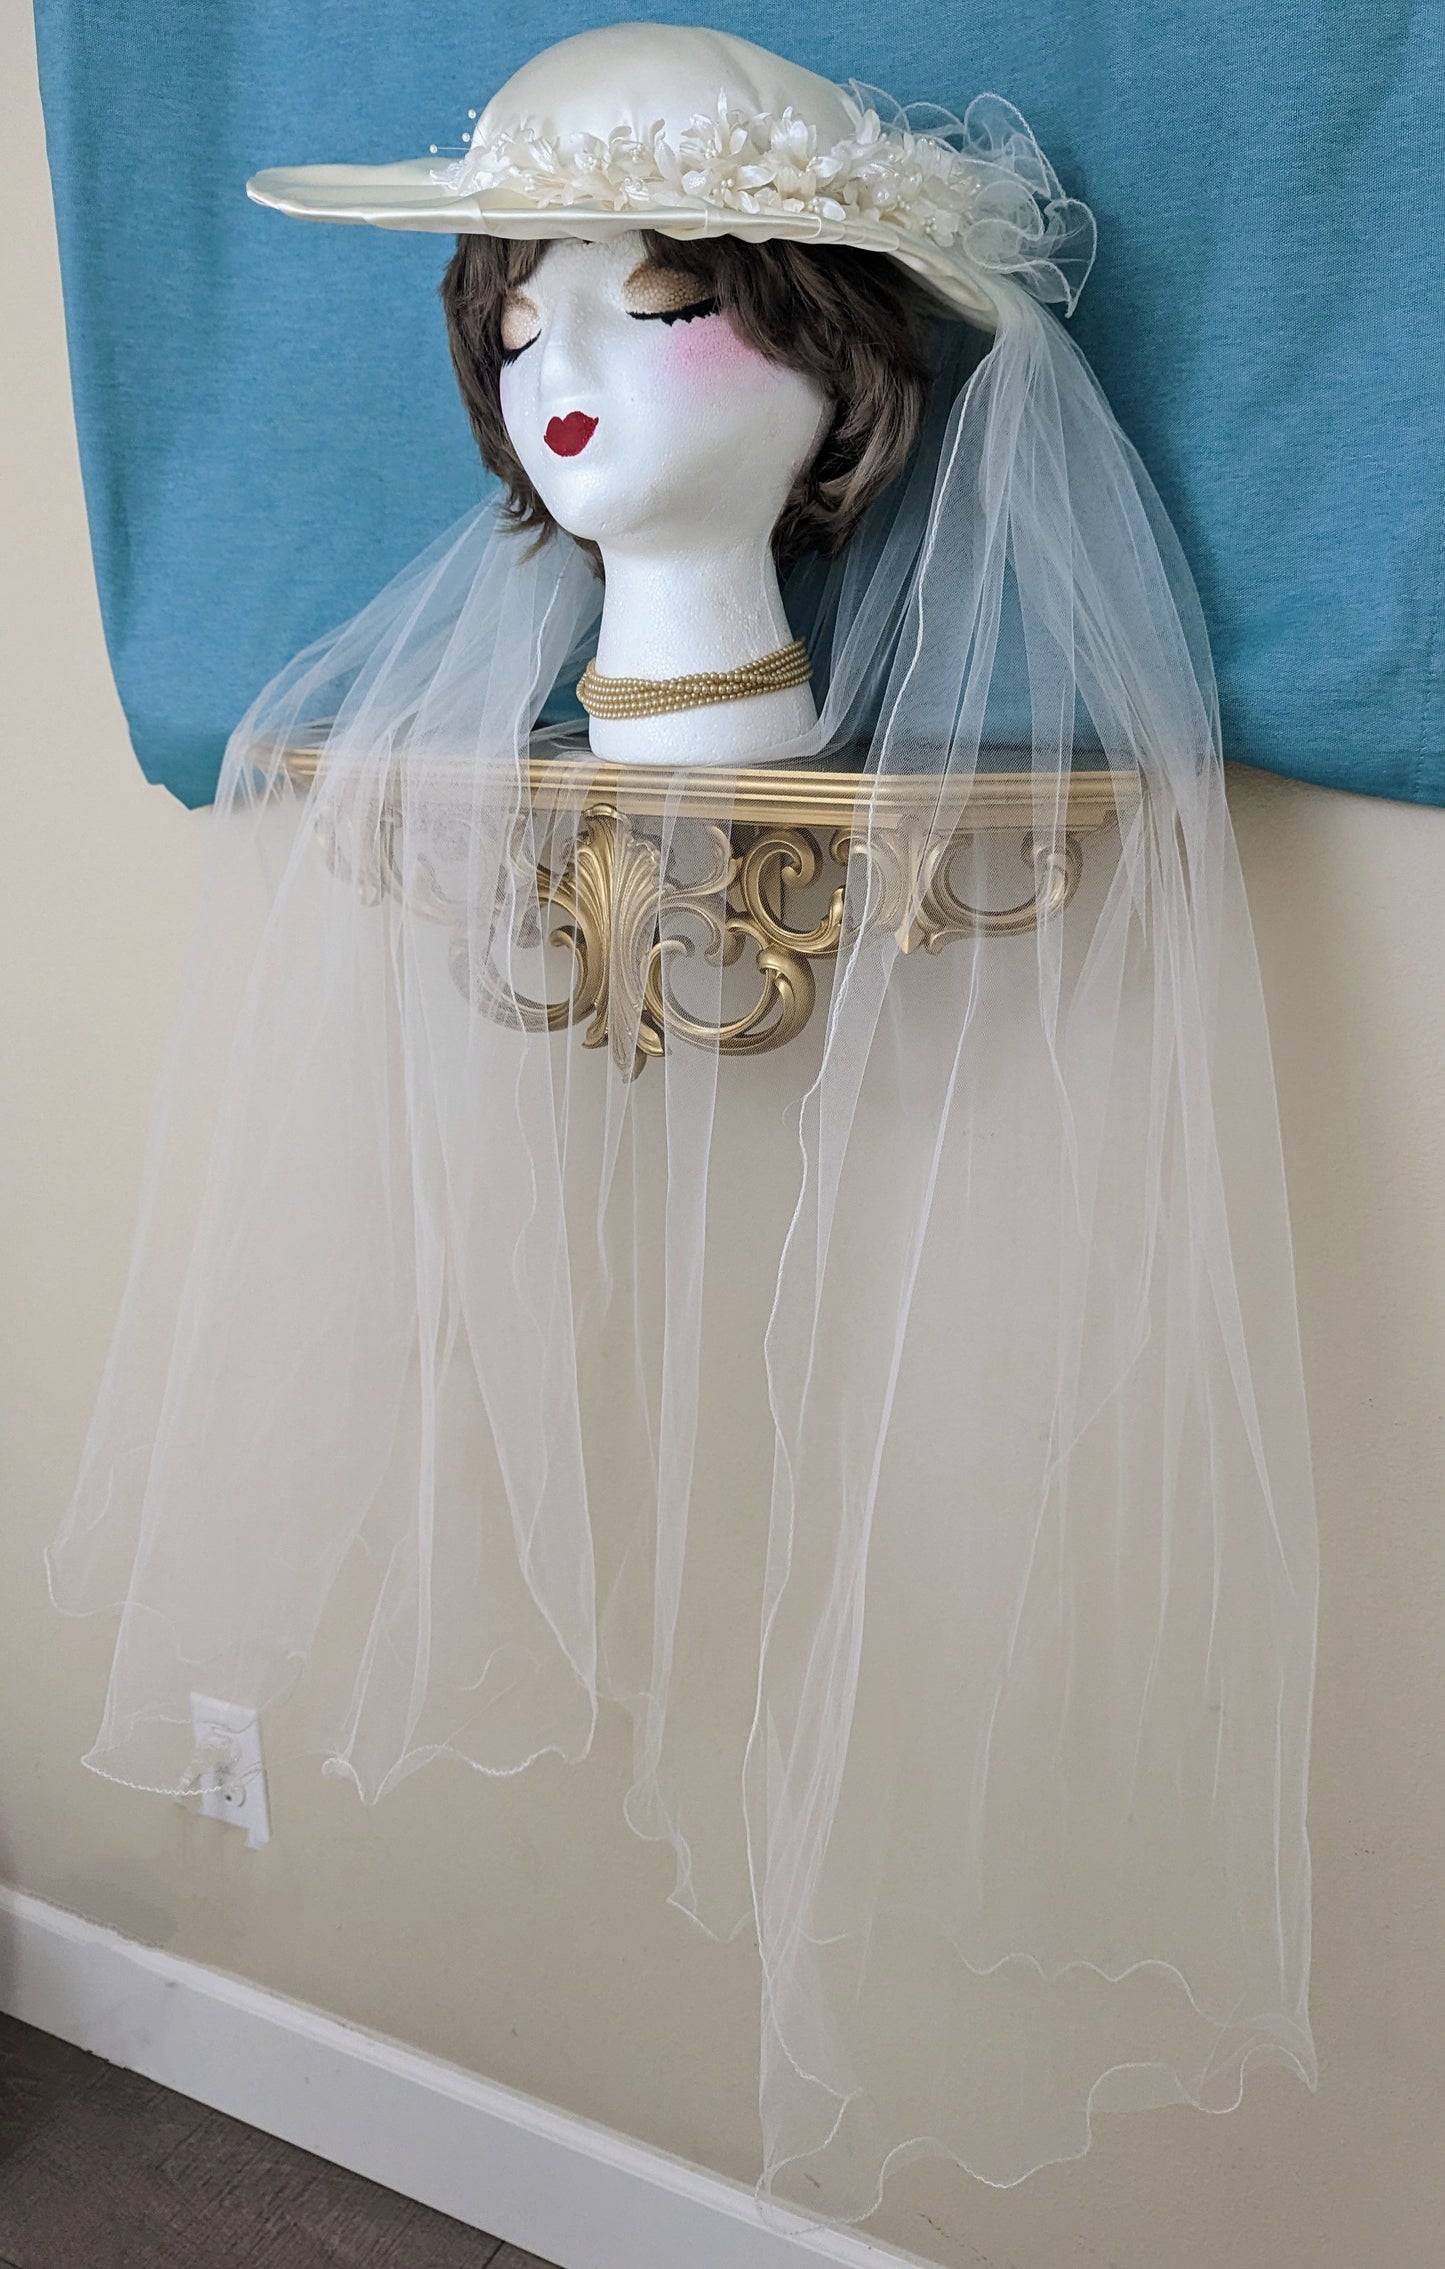 1980s Wedding Veil and Hat